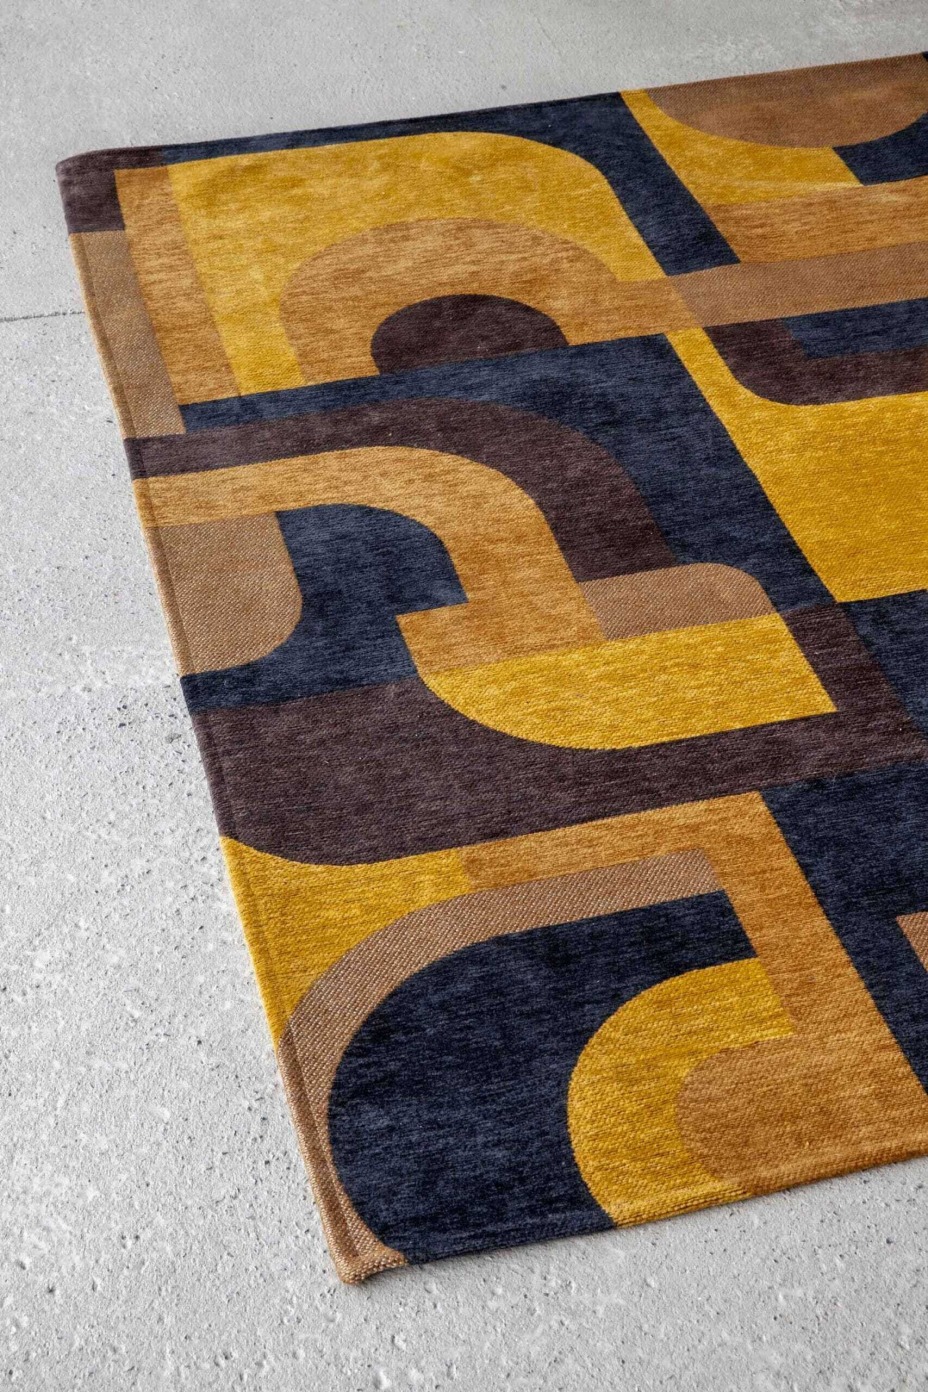 Module Collection Nuance Yellow Meyer 9210 rug by Louis De Poortere